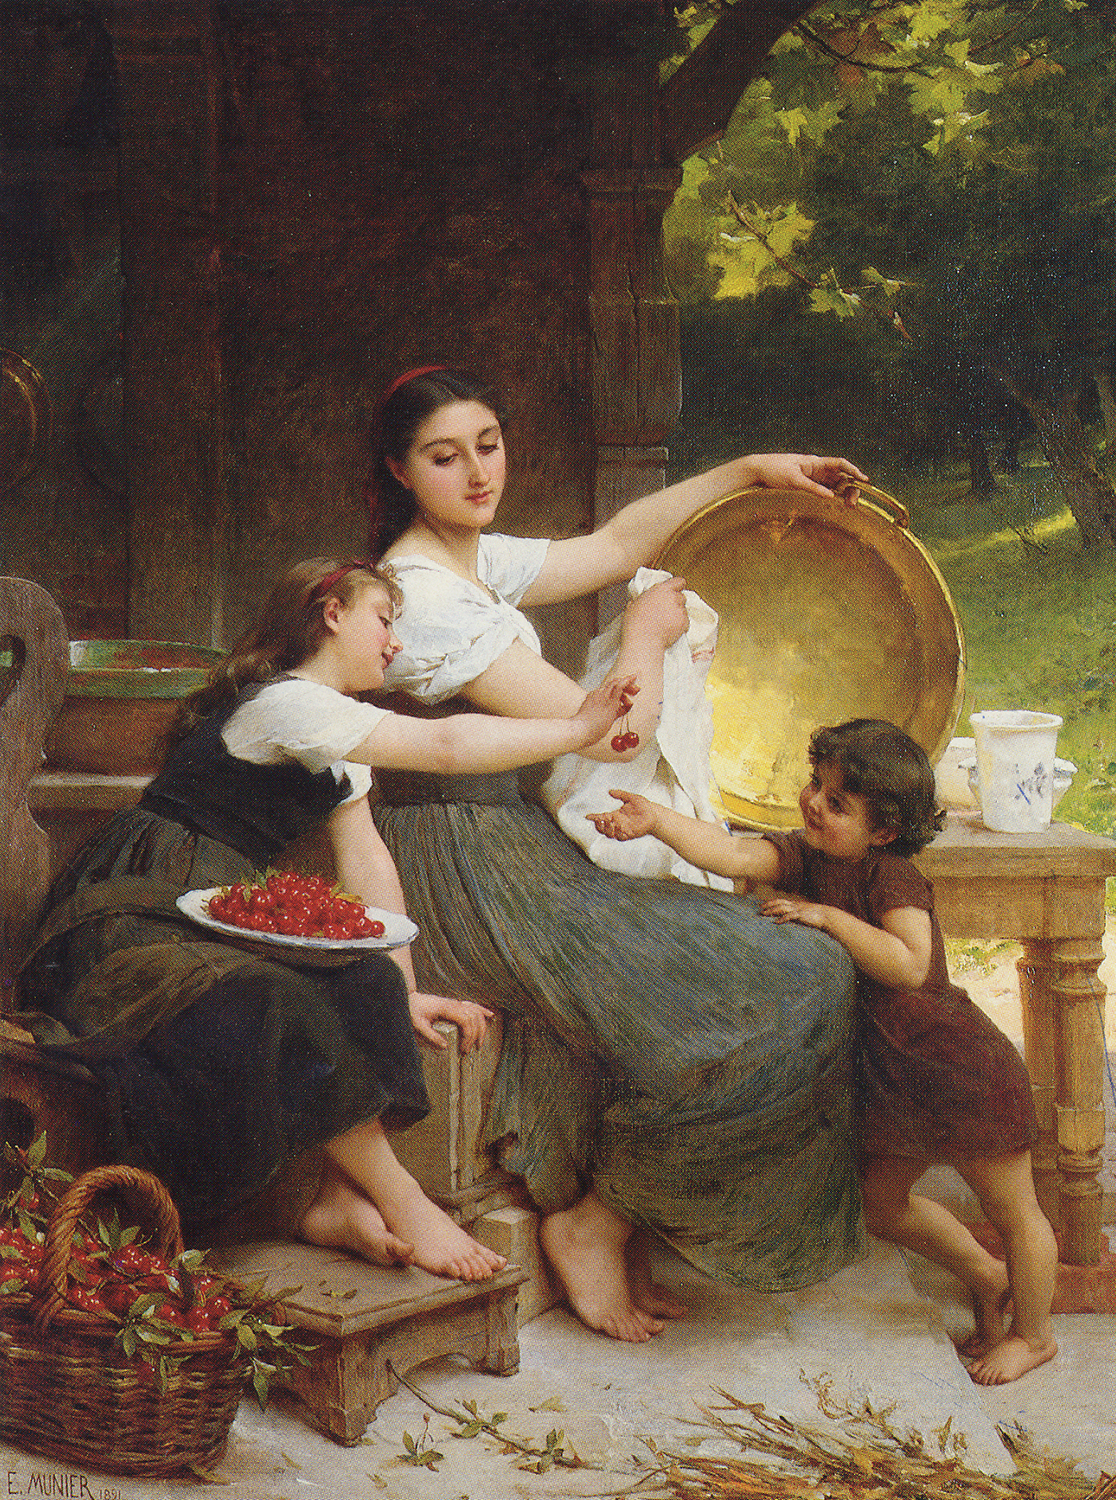 A mother and two daughters in a landscape - Les Confitures - Emile Munier